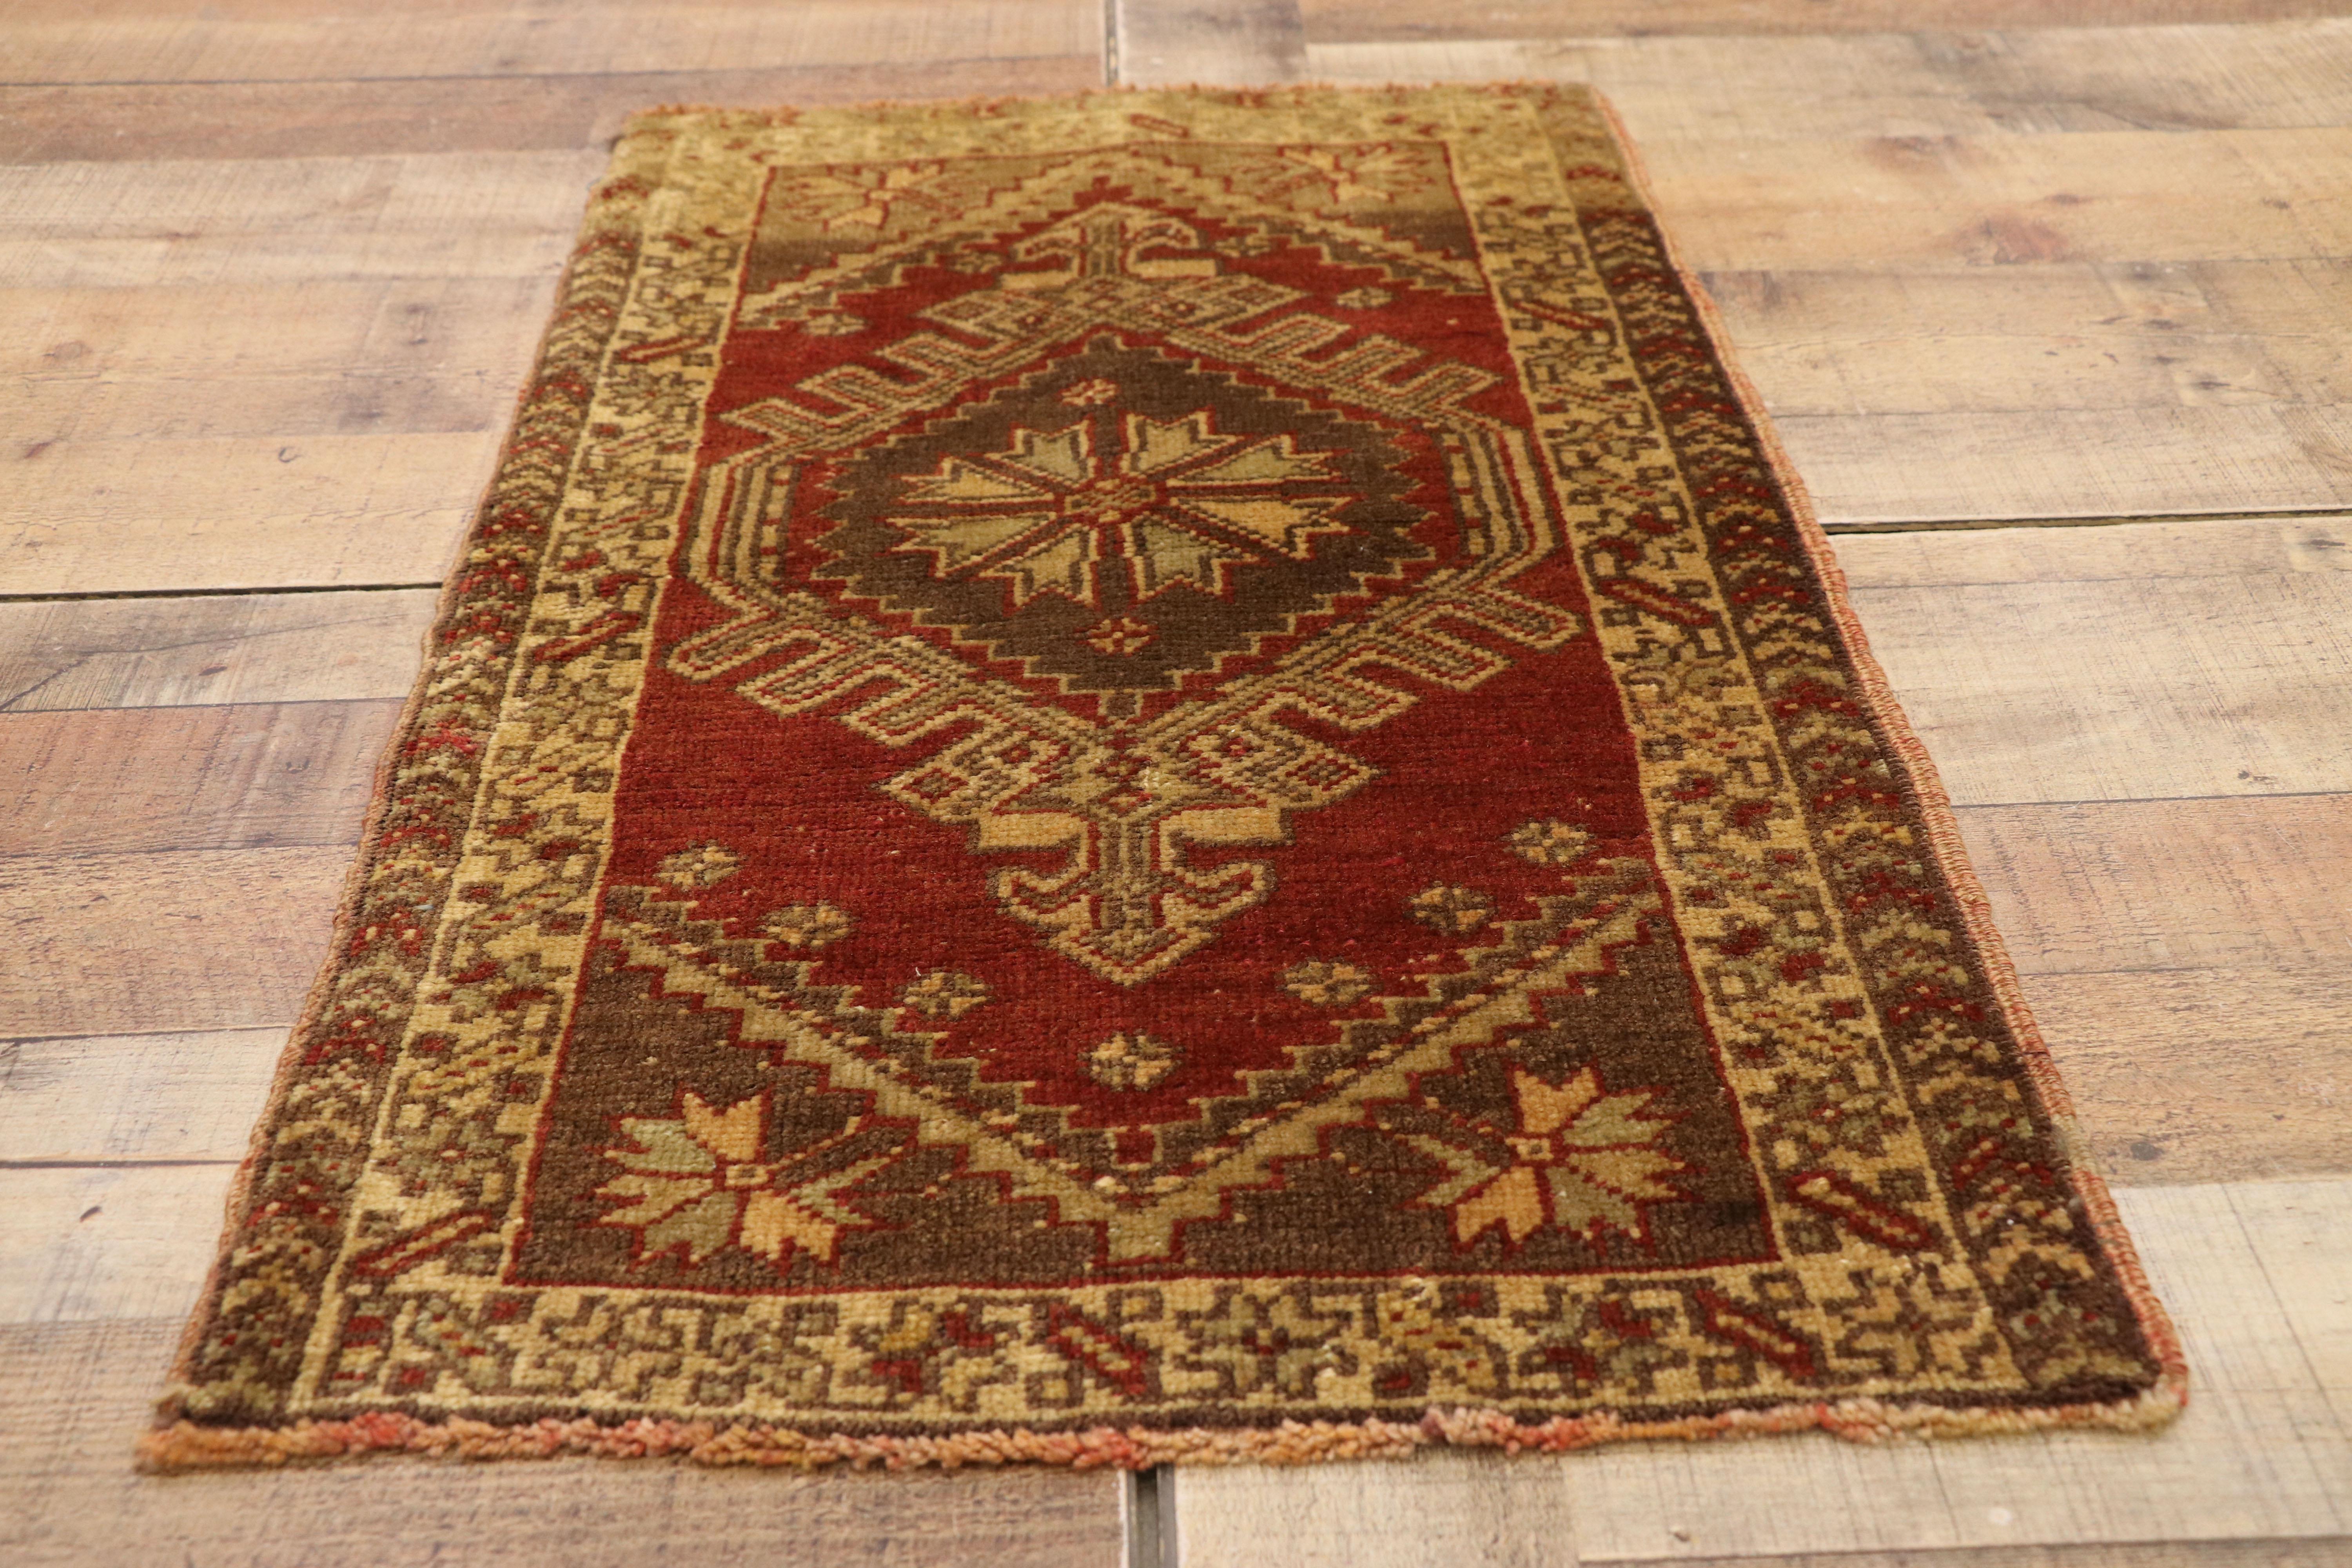 Vintage Turkish Oushak Rug Yastik Scatter Rug, Small Accent Rug In Good Condition For Sale In Dallas, TX